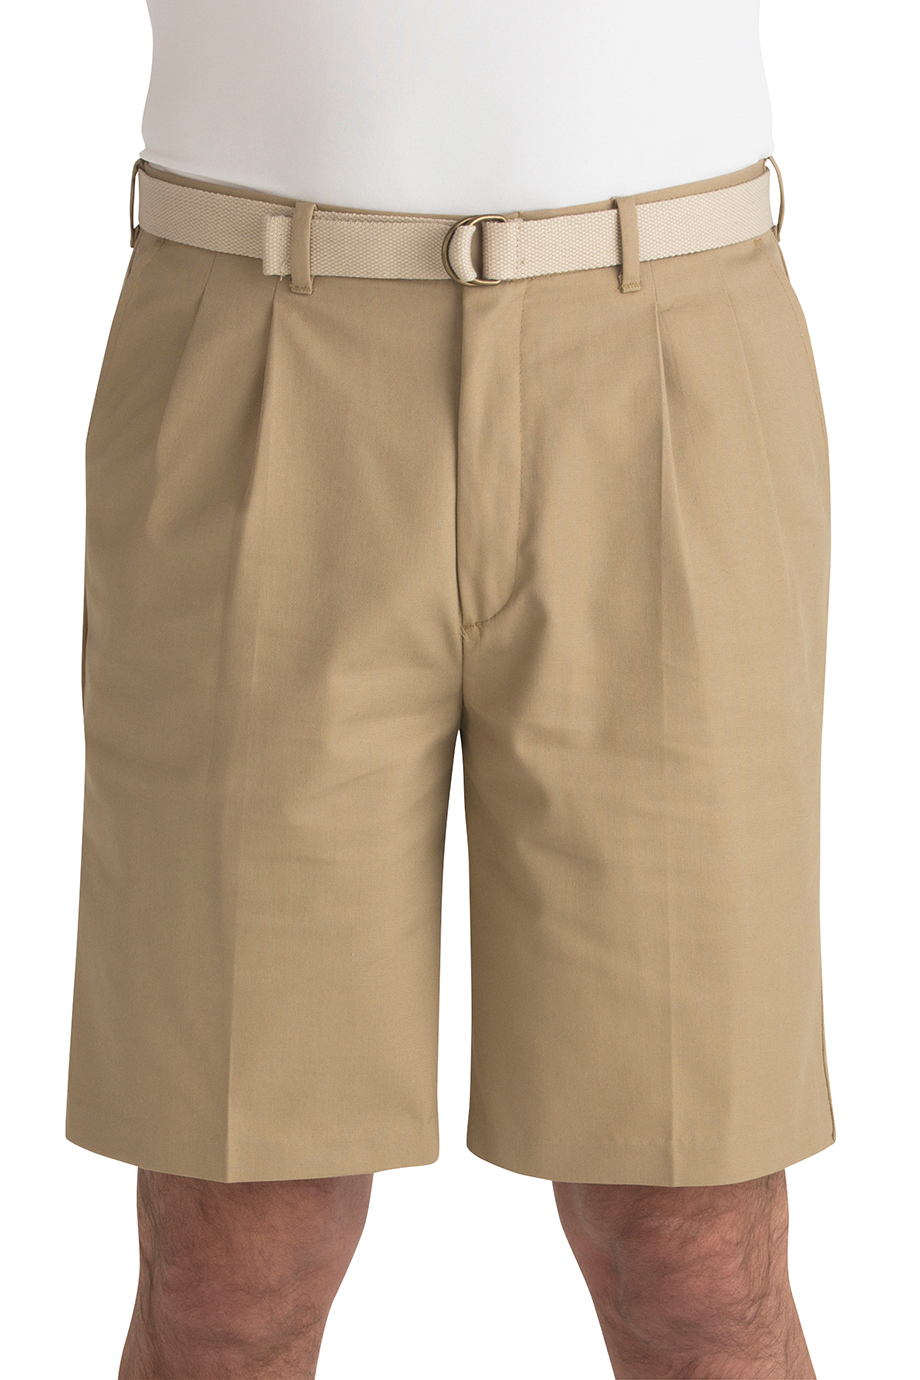 Edwards Garment Mens Pleated Front Moisture Wicking Pocket Chino Short 